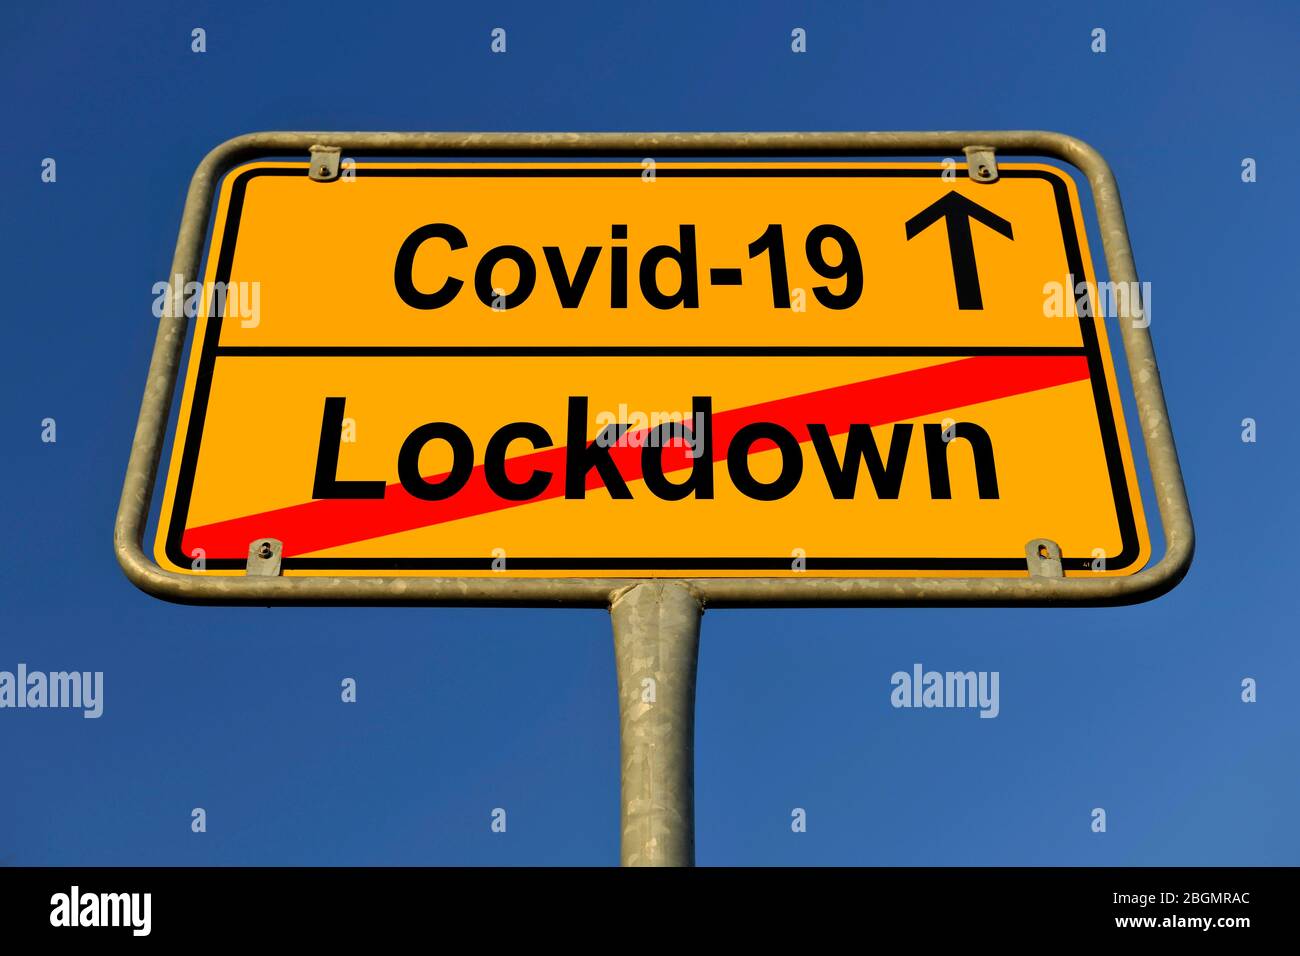 Digital Composing, symbolic image, place-name sign, lifting or loosening of lockdown, shutdown, leads to increased infections, coronavirus, Covid-19 Stock Photo